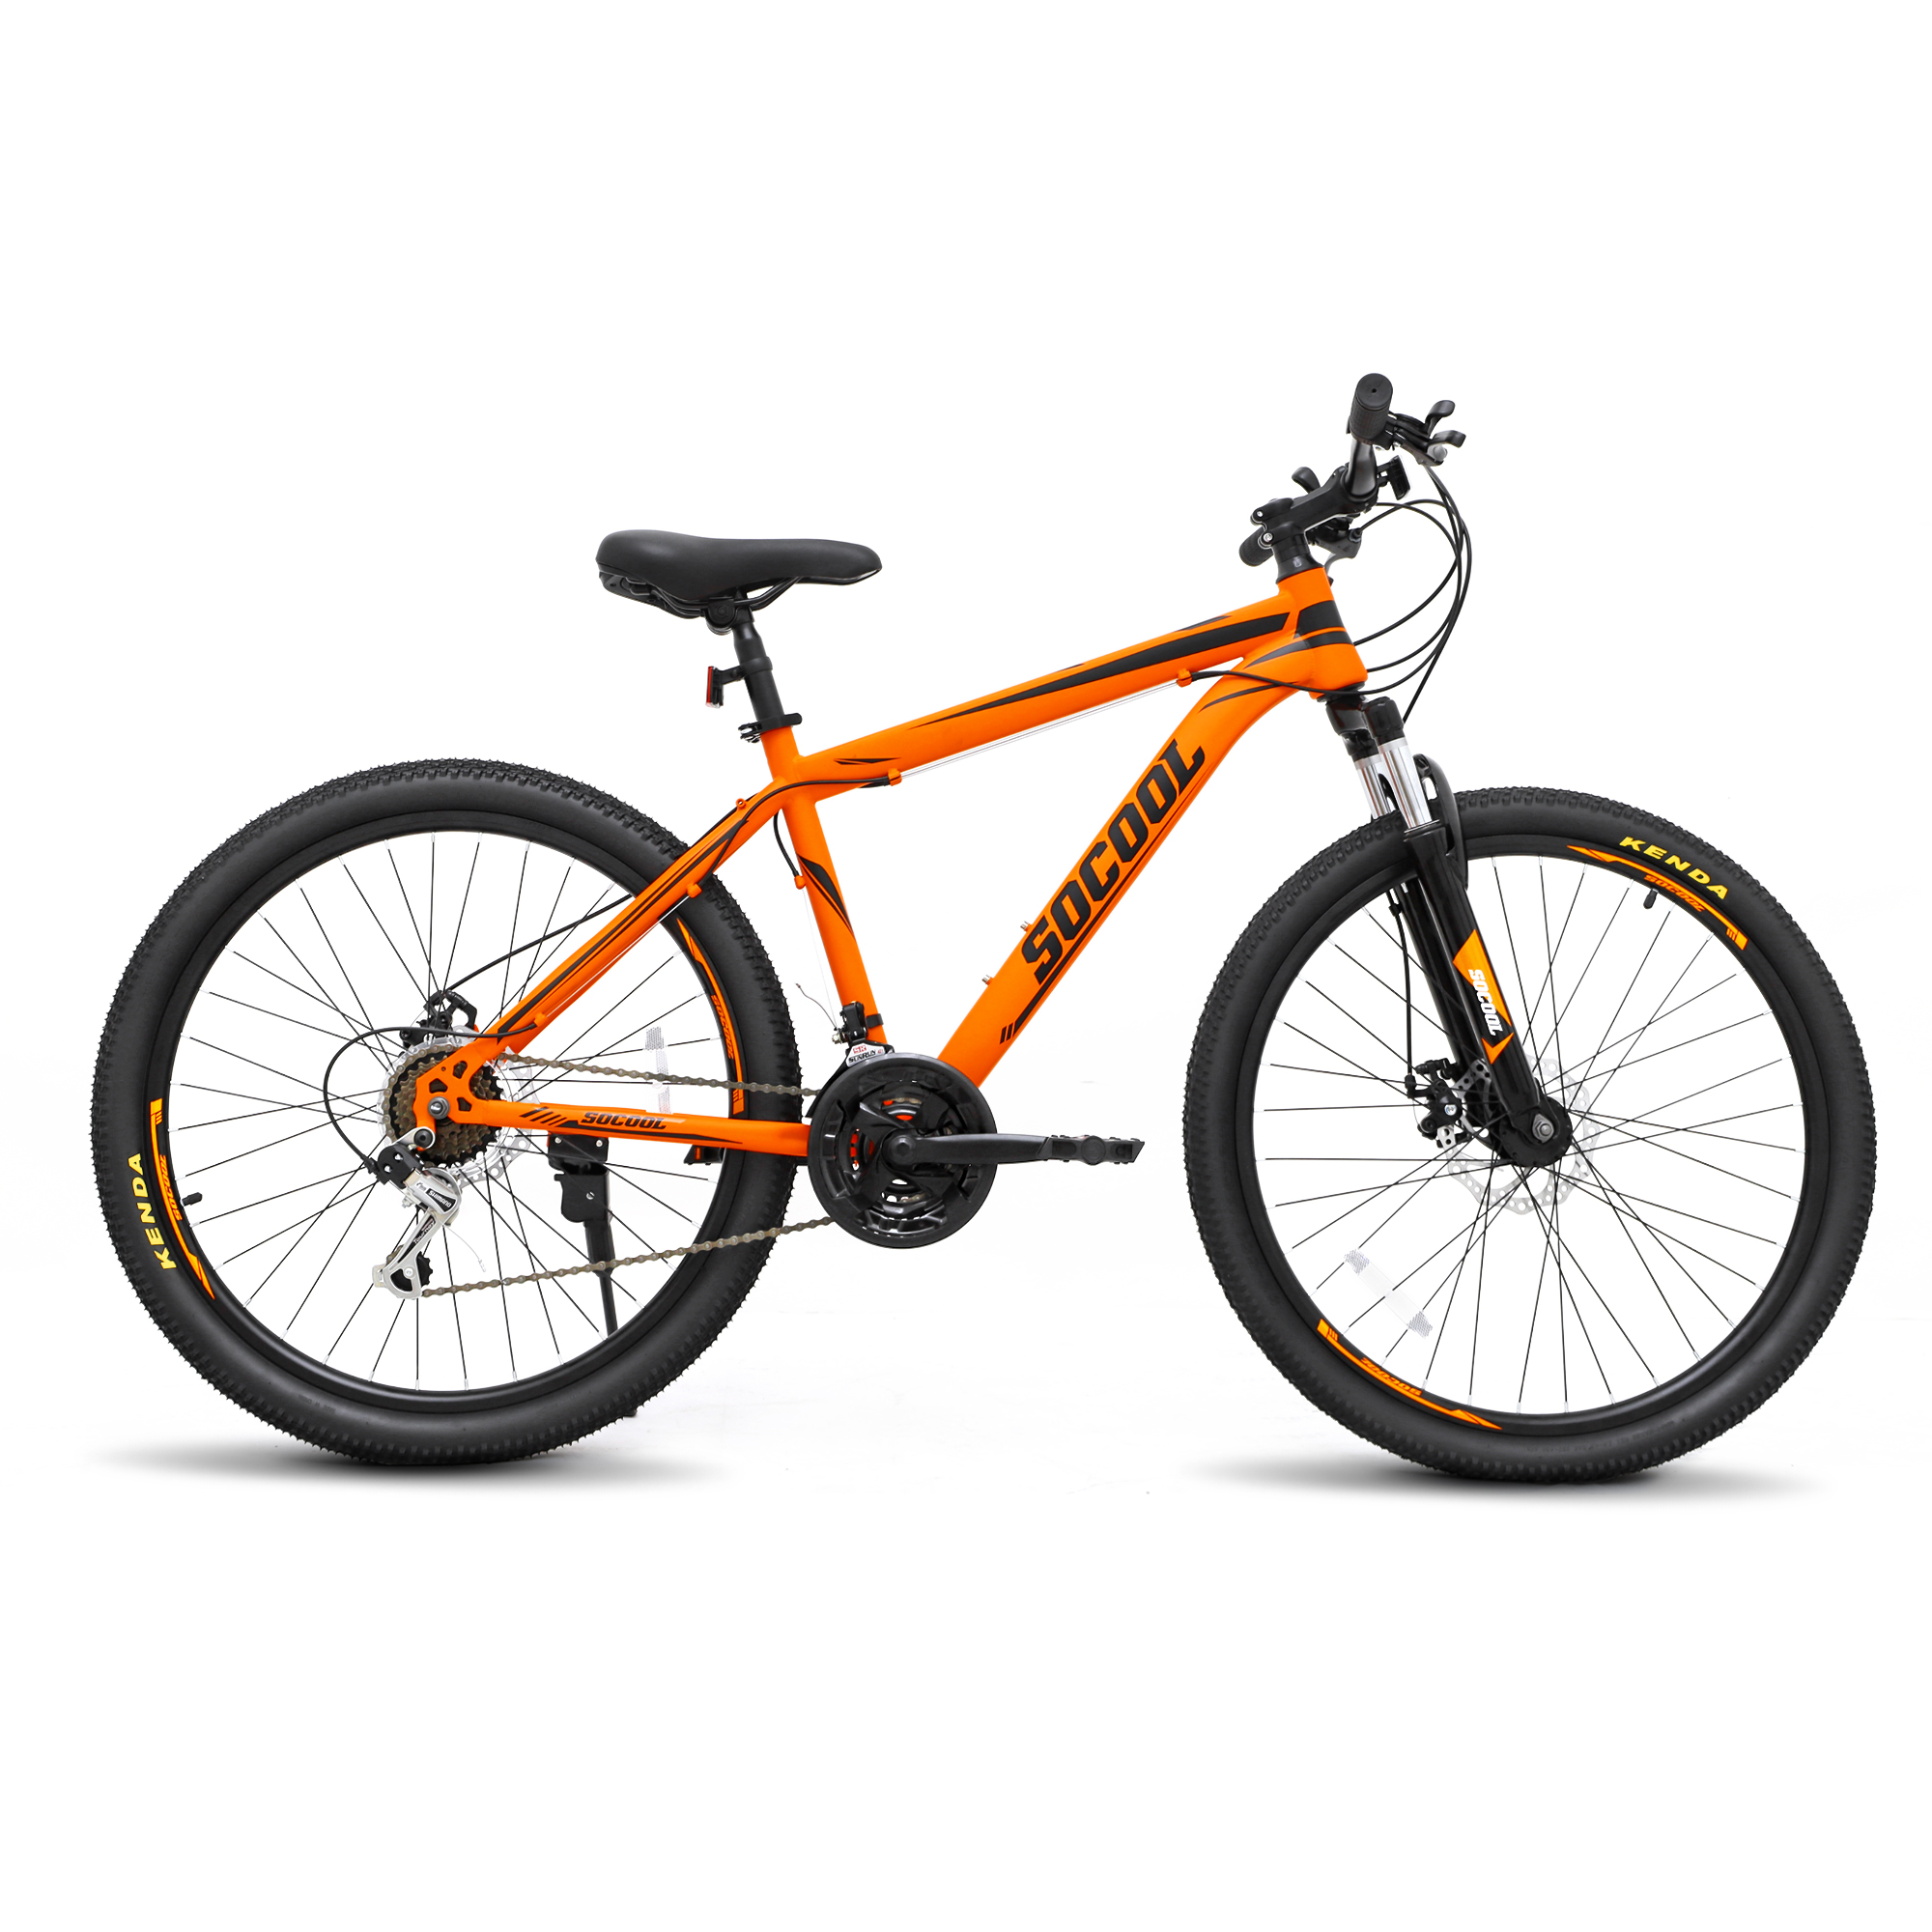 SOCOOL Mountain Bikes with 26-Inch Wheels, Aluminum Frame and Pedals, 26" Bike for Adults and Youth, Shimano Parts, 21 Speed Mountain Bicycle -Orange & Black, LO229BK - image 1 of 9